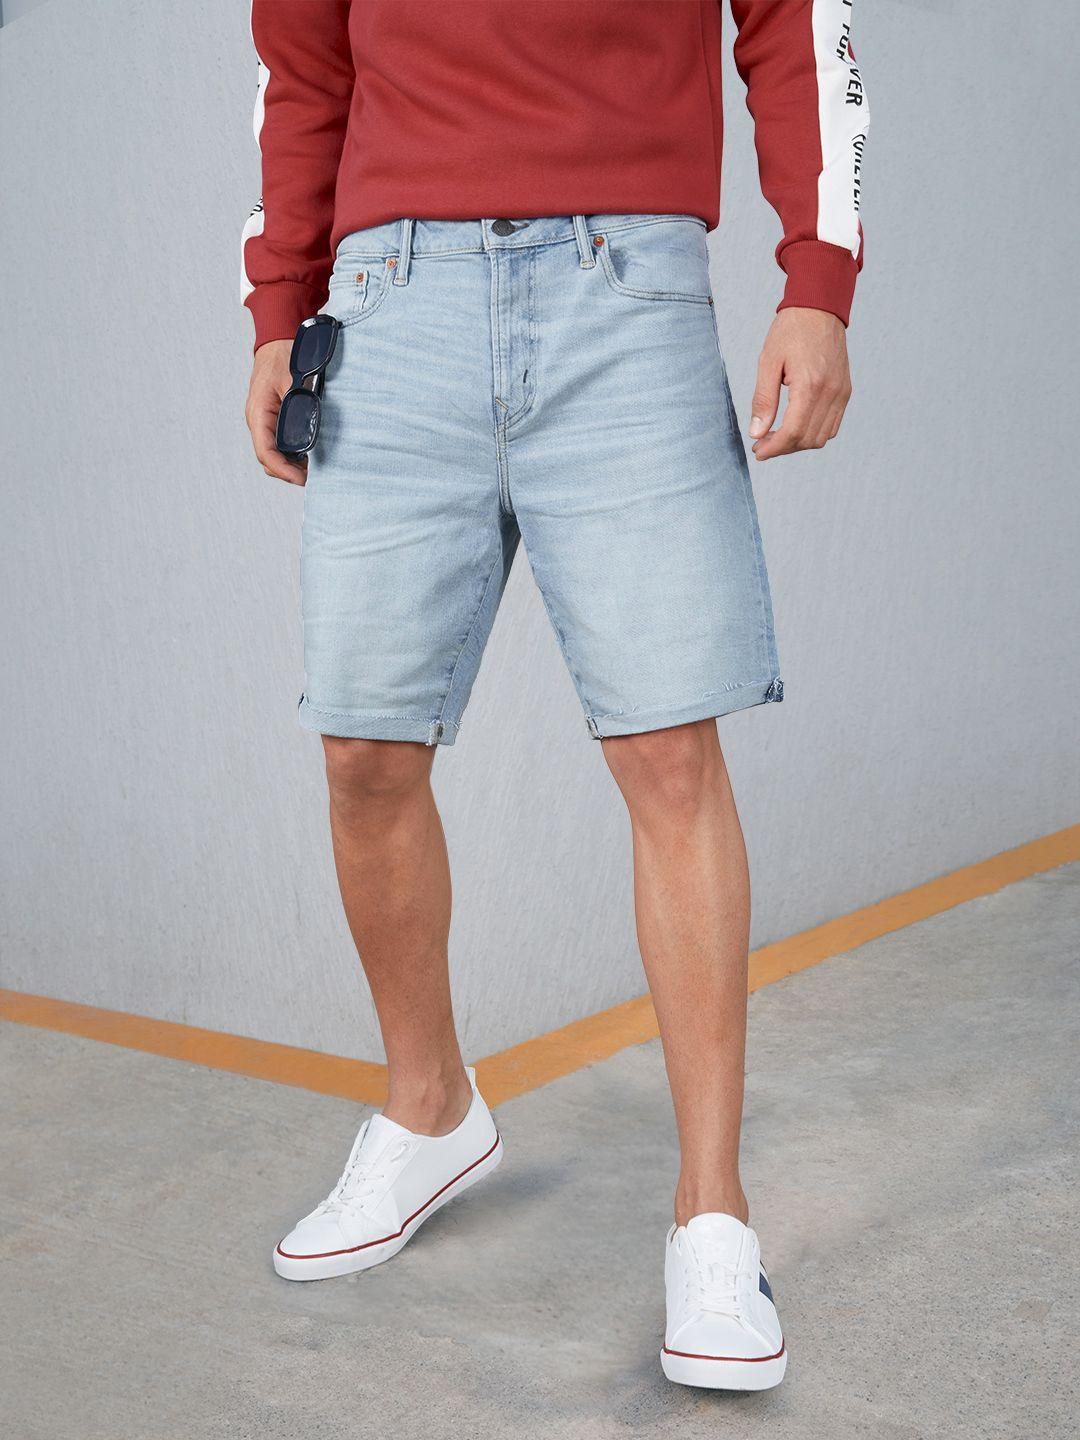 american-eagle-outfitters-men-blue-washed-denim-shorts